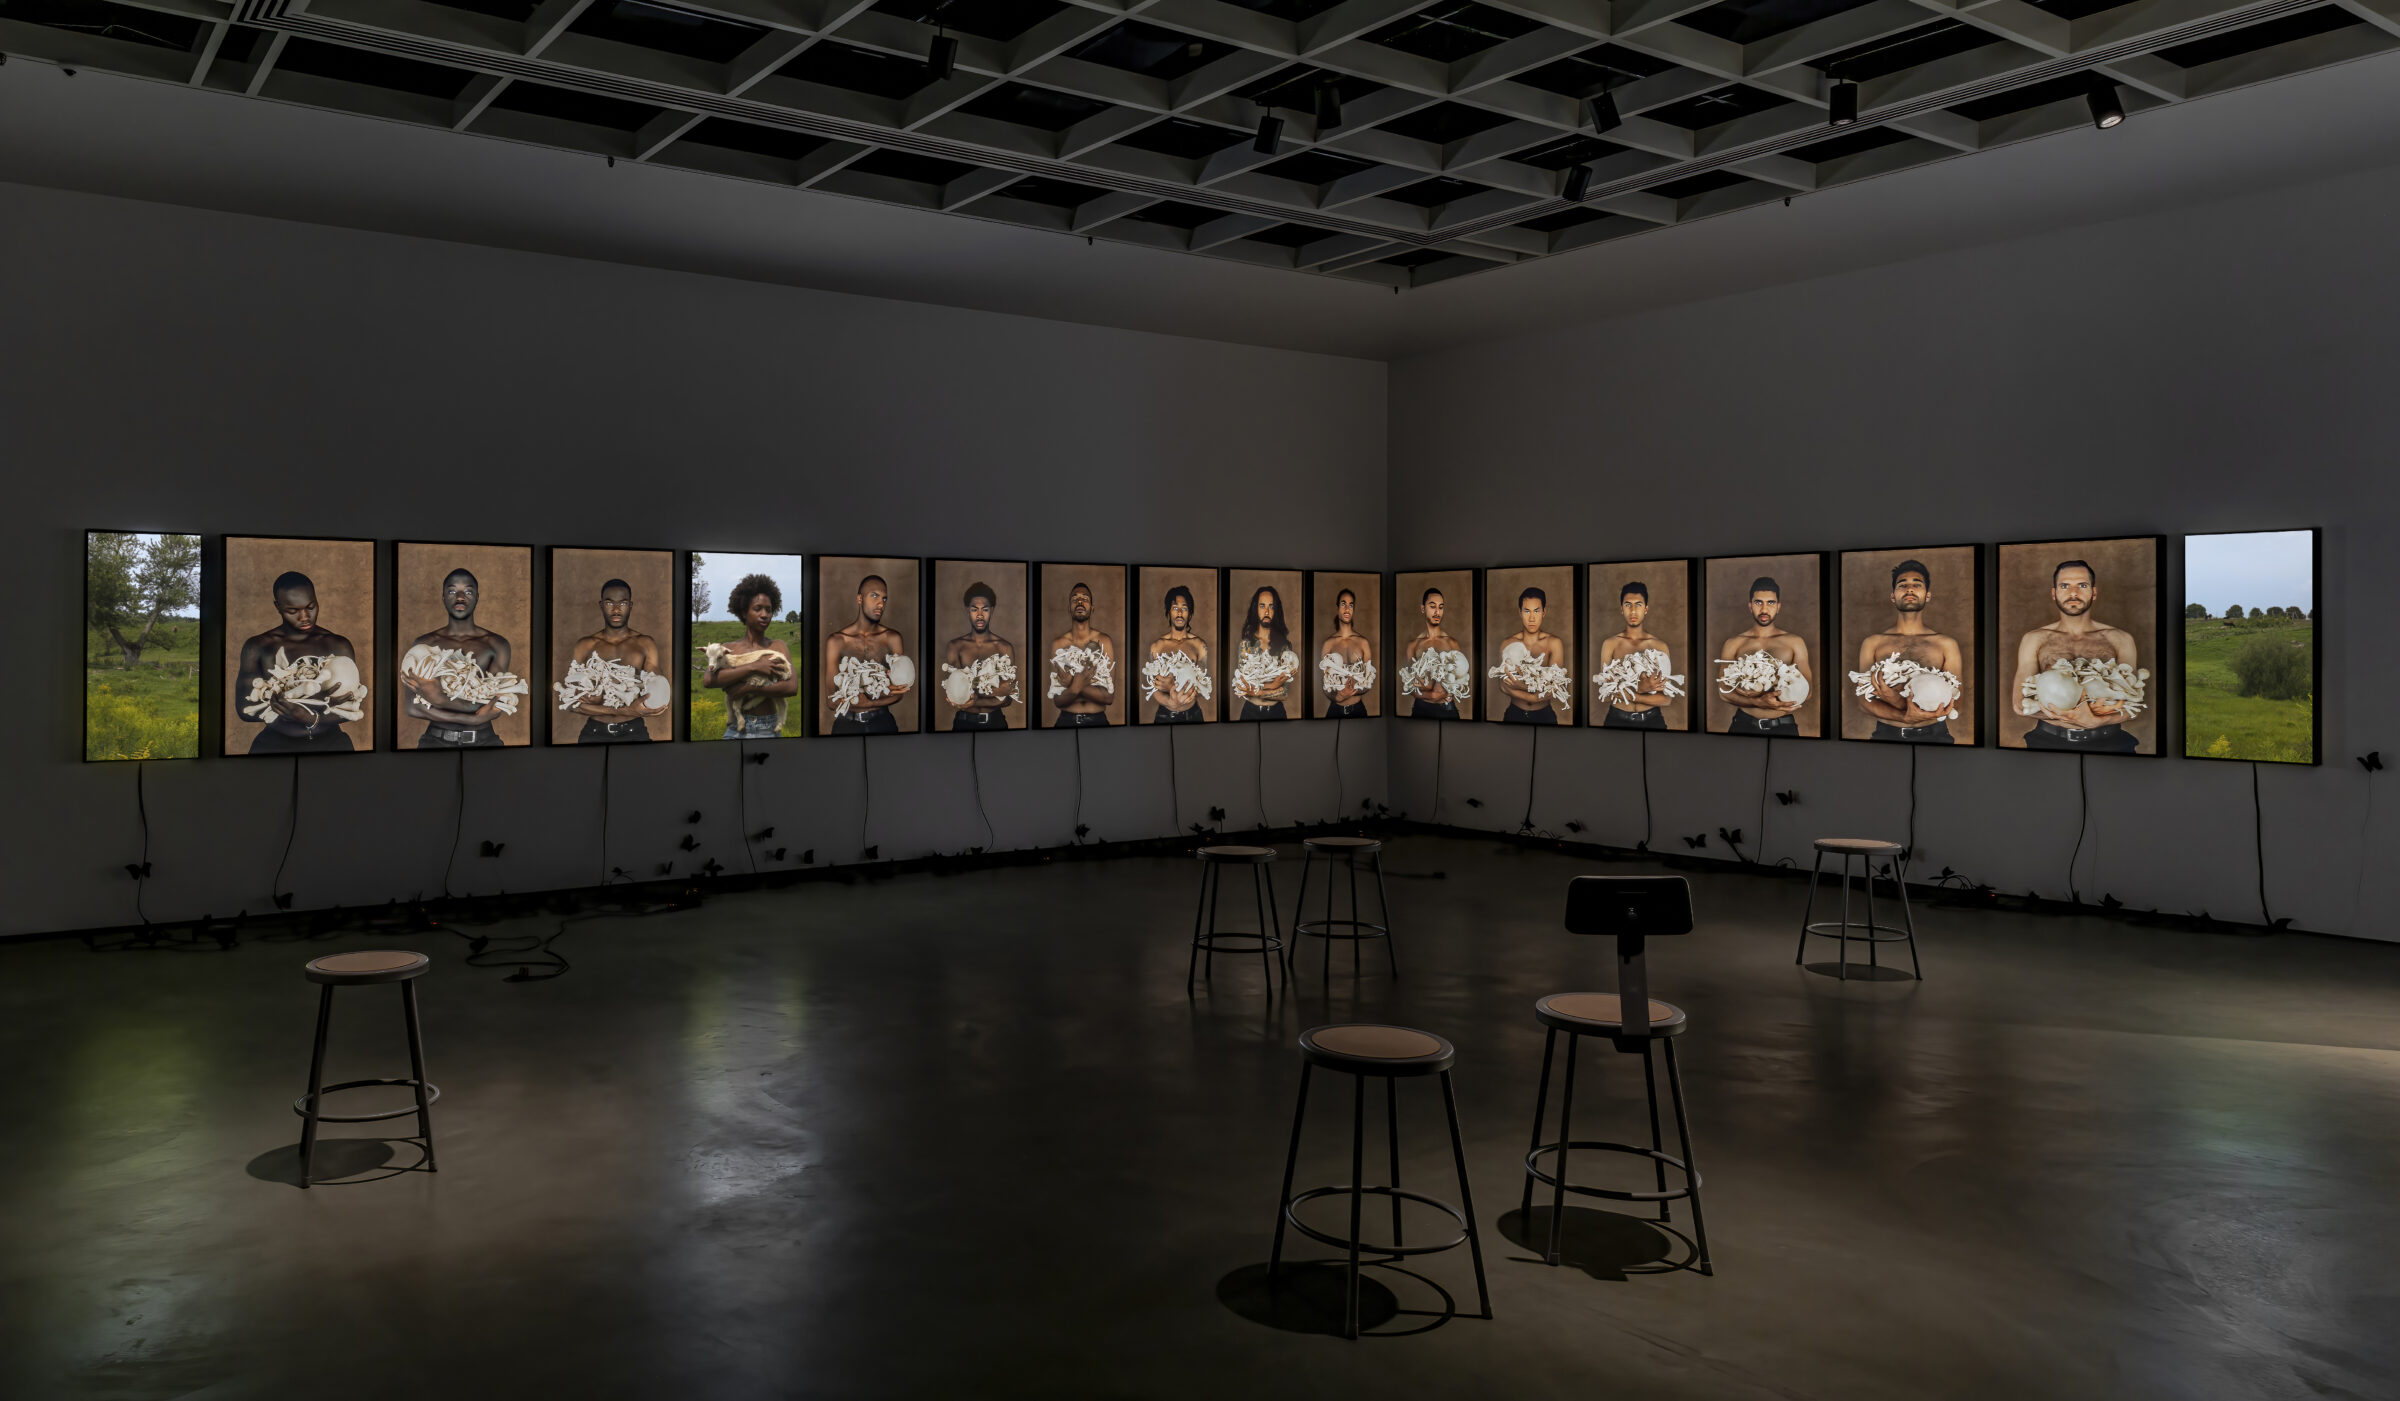 Installation view of Scapegoat - a series of light boxes are affixed to a wall with photographs of young men cradling a set of bones. In the foreground are stools scattered throughout the exhibition space.